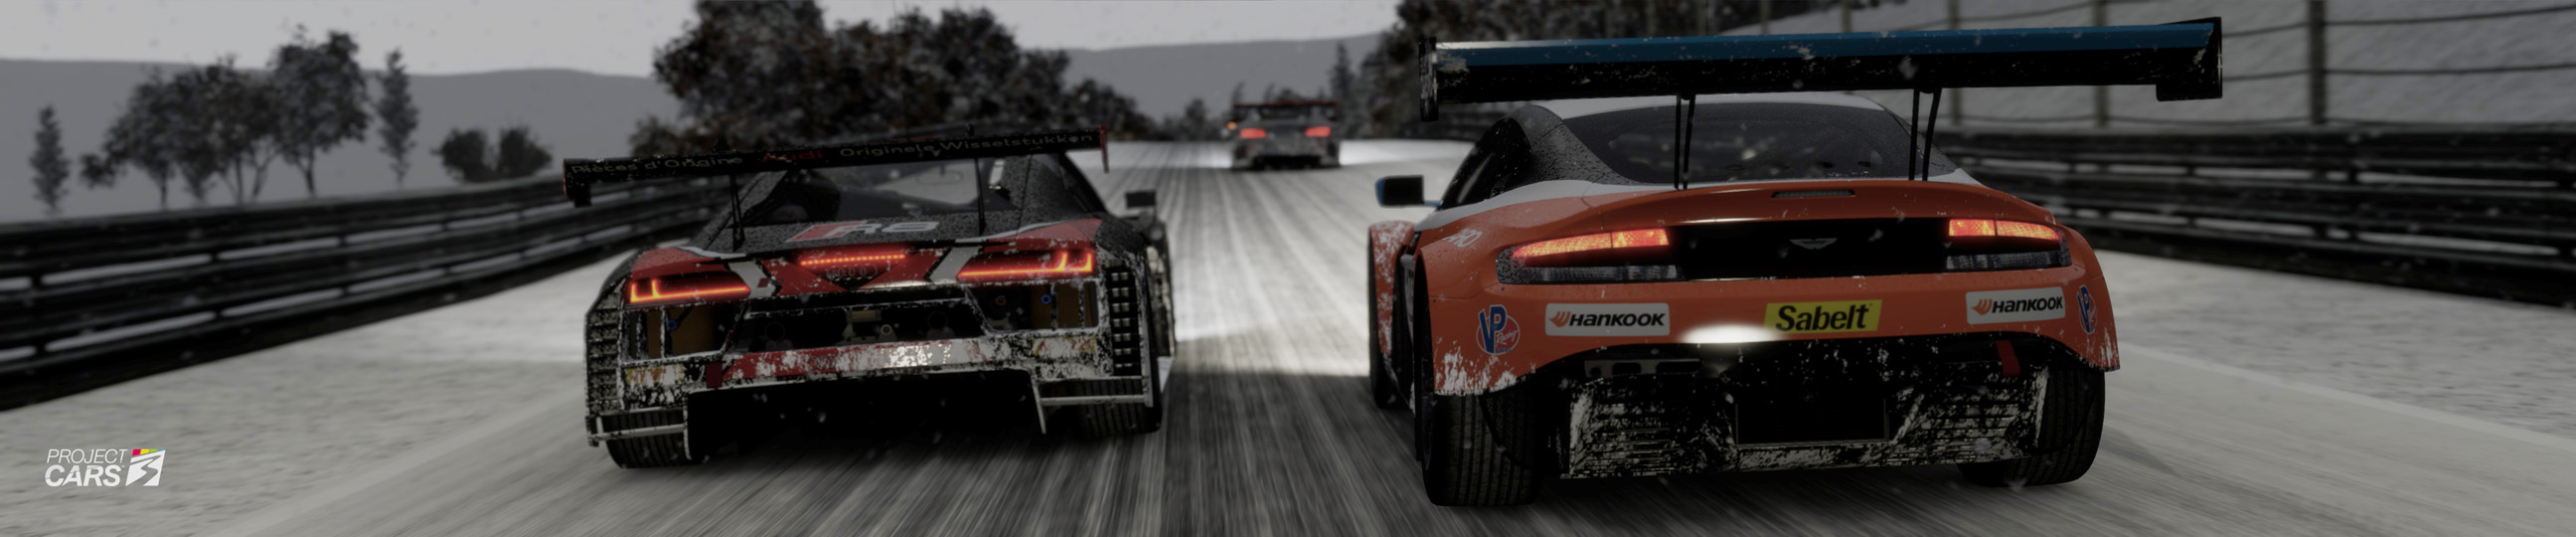 2a PROJECT CARS GT3 at NORDS Snow crop copy.jpg